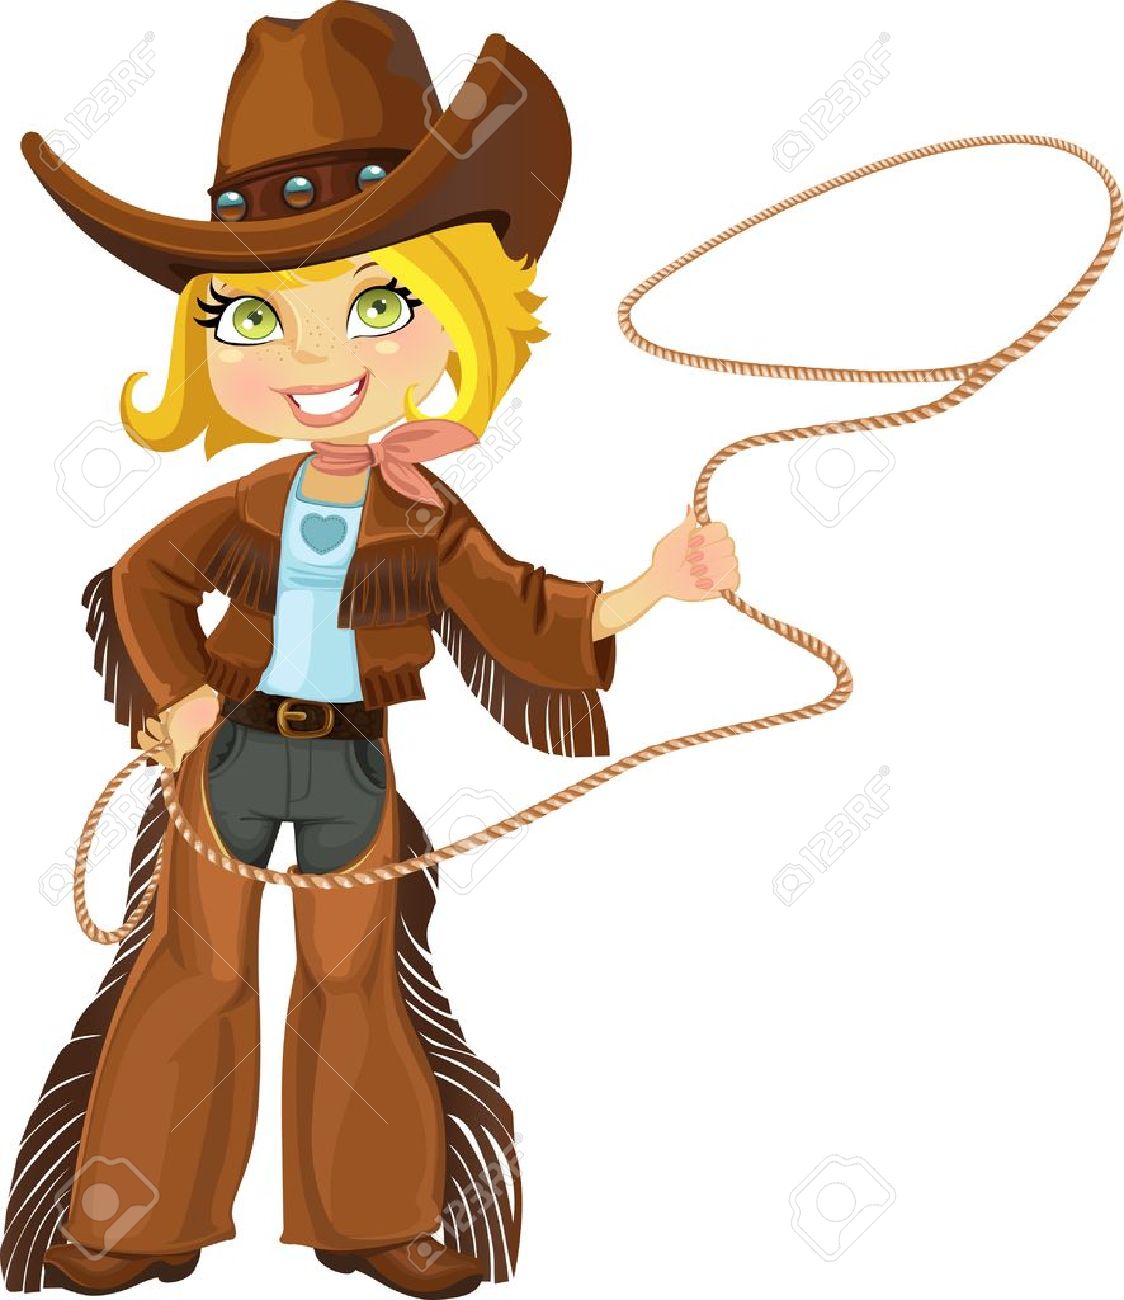 lasso: Blond cowgirl with Lasso